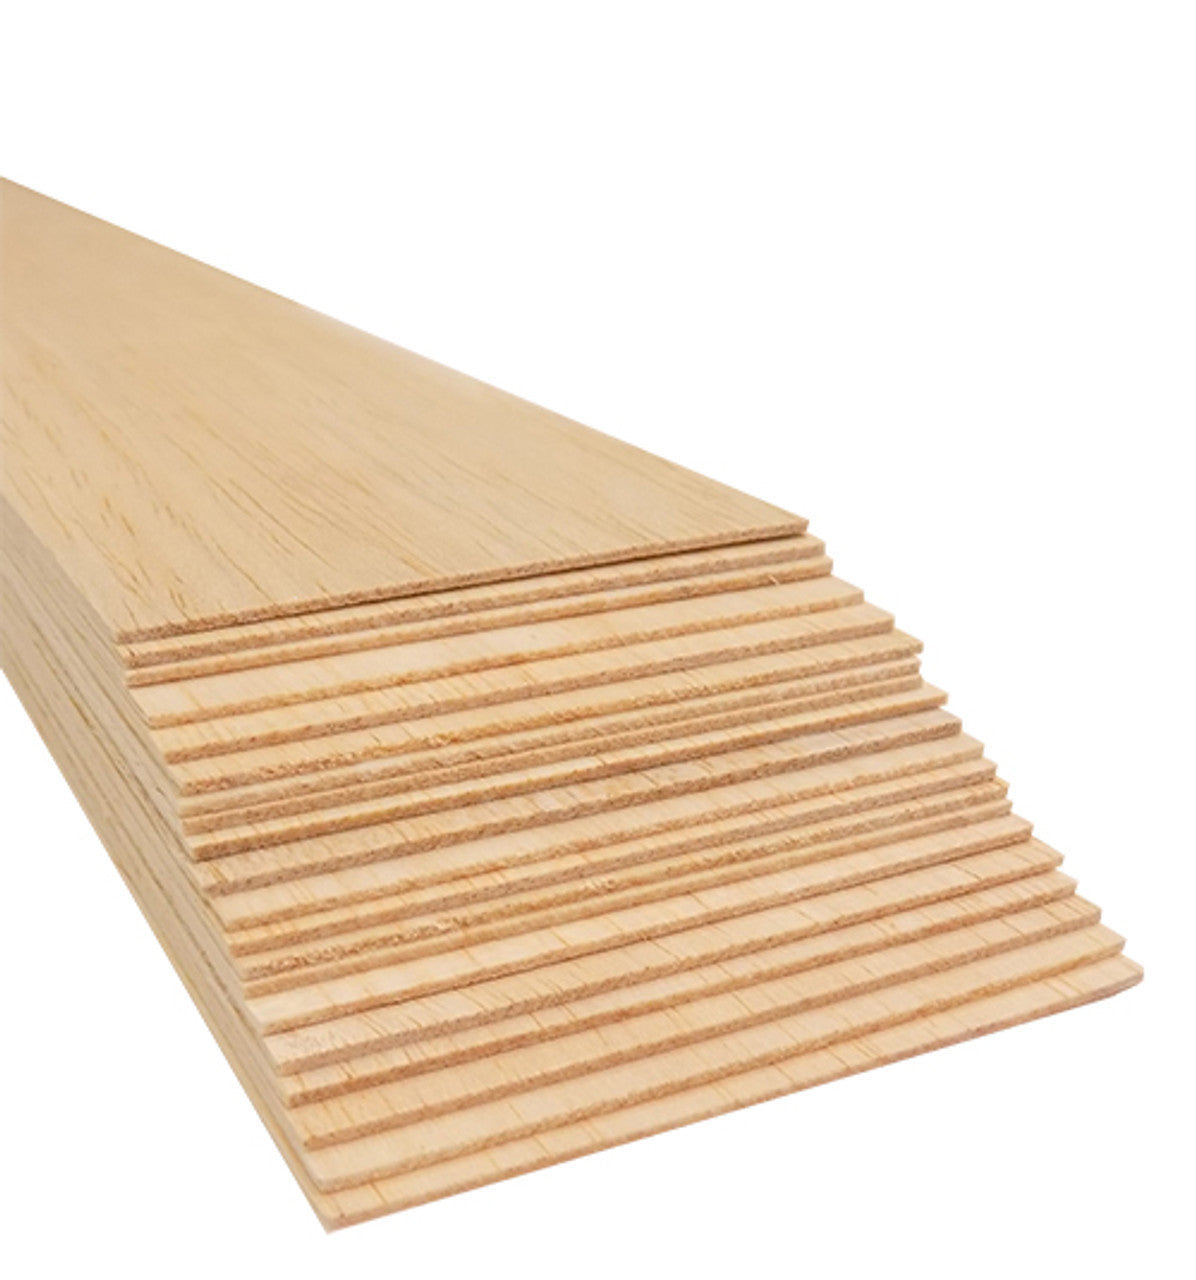 Basswood Sheets 3/32x4x24